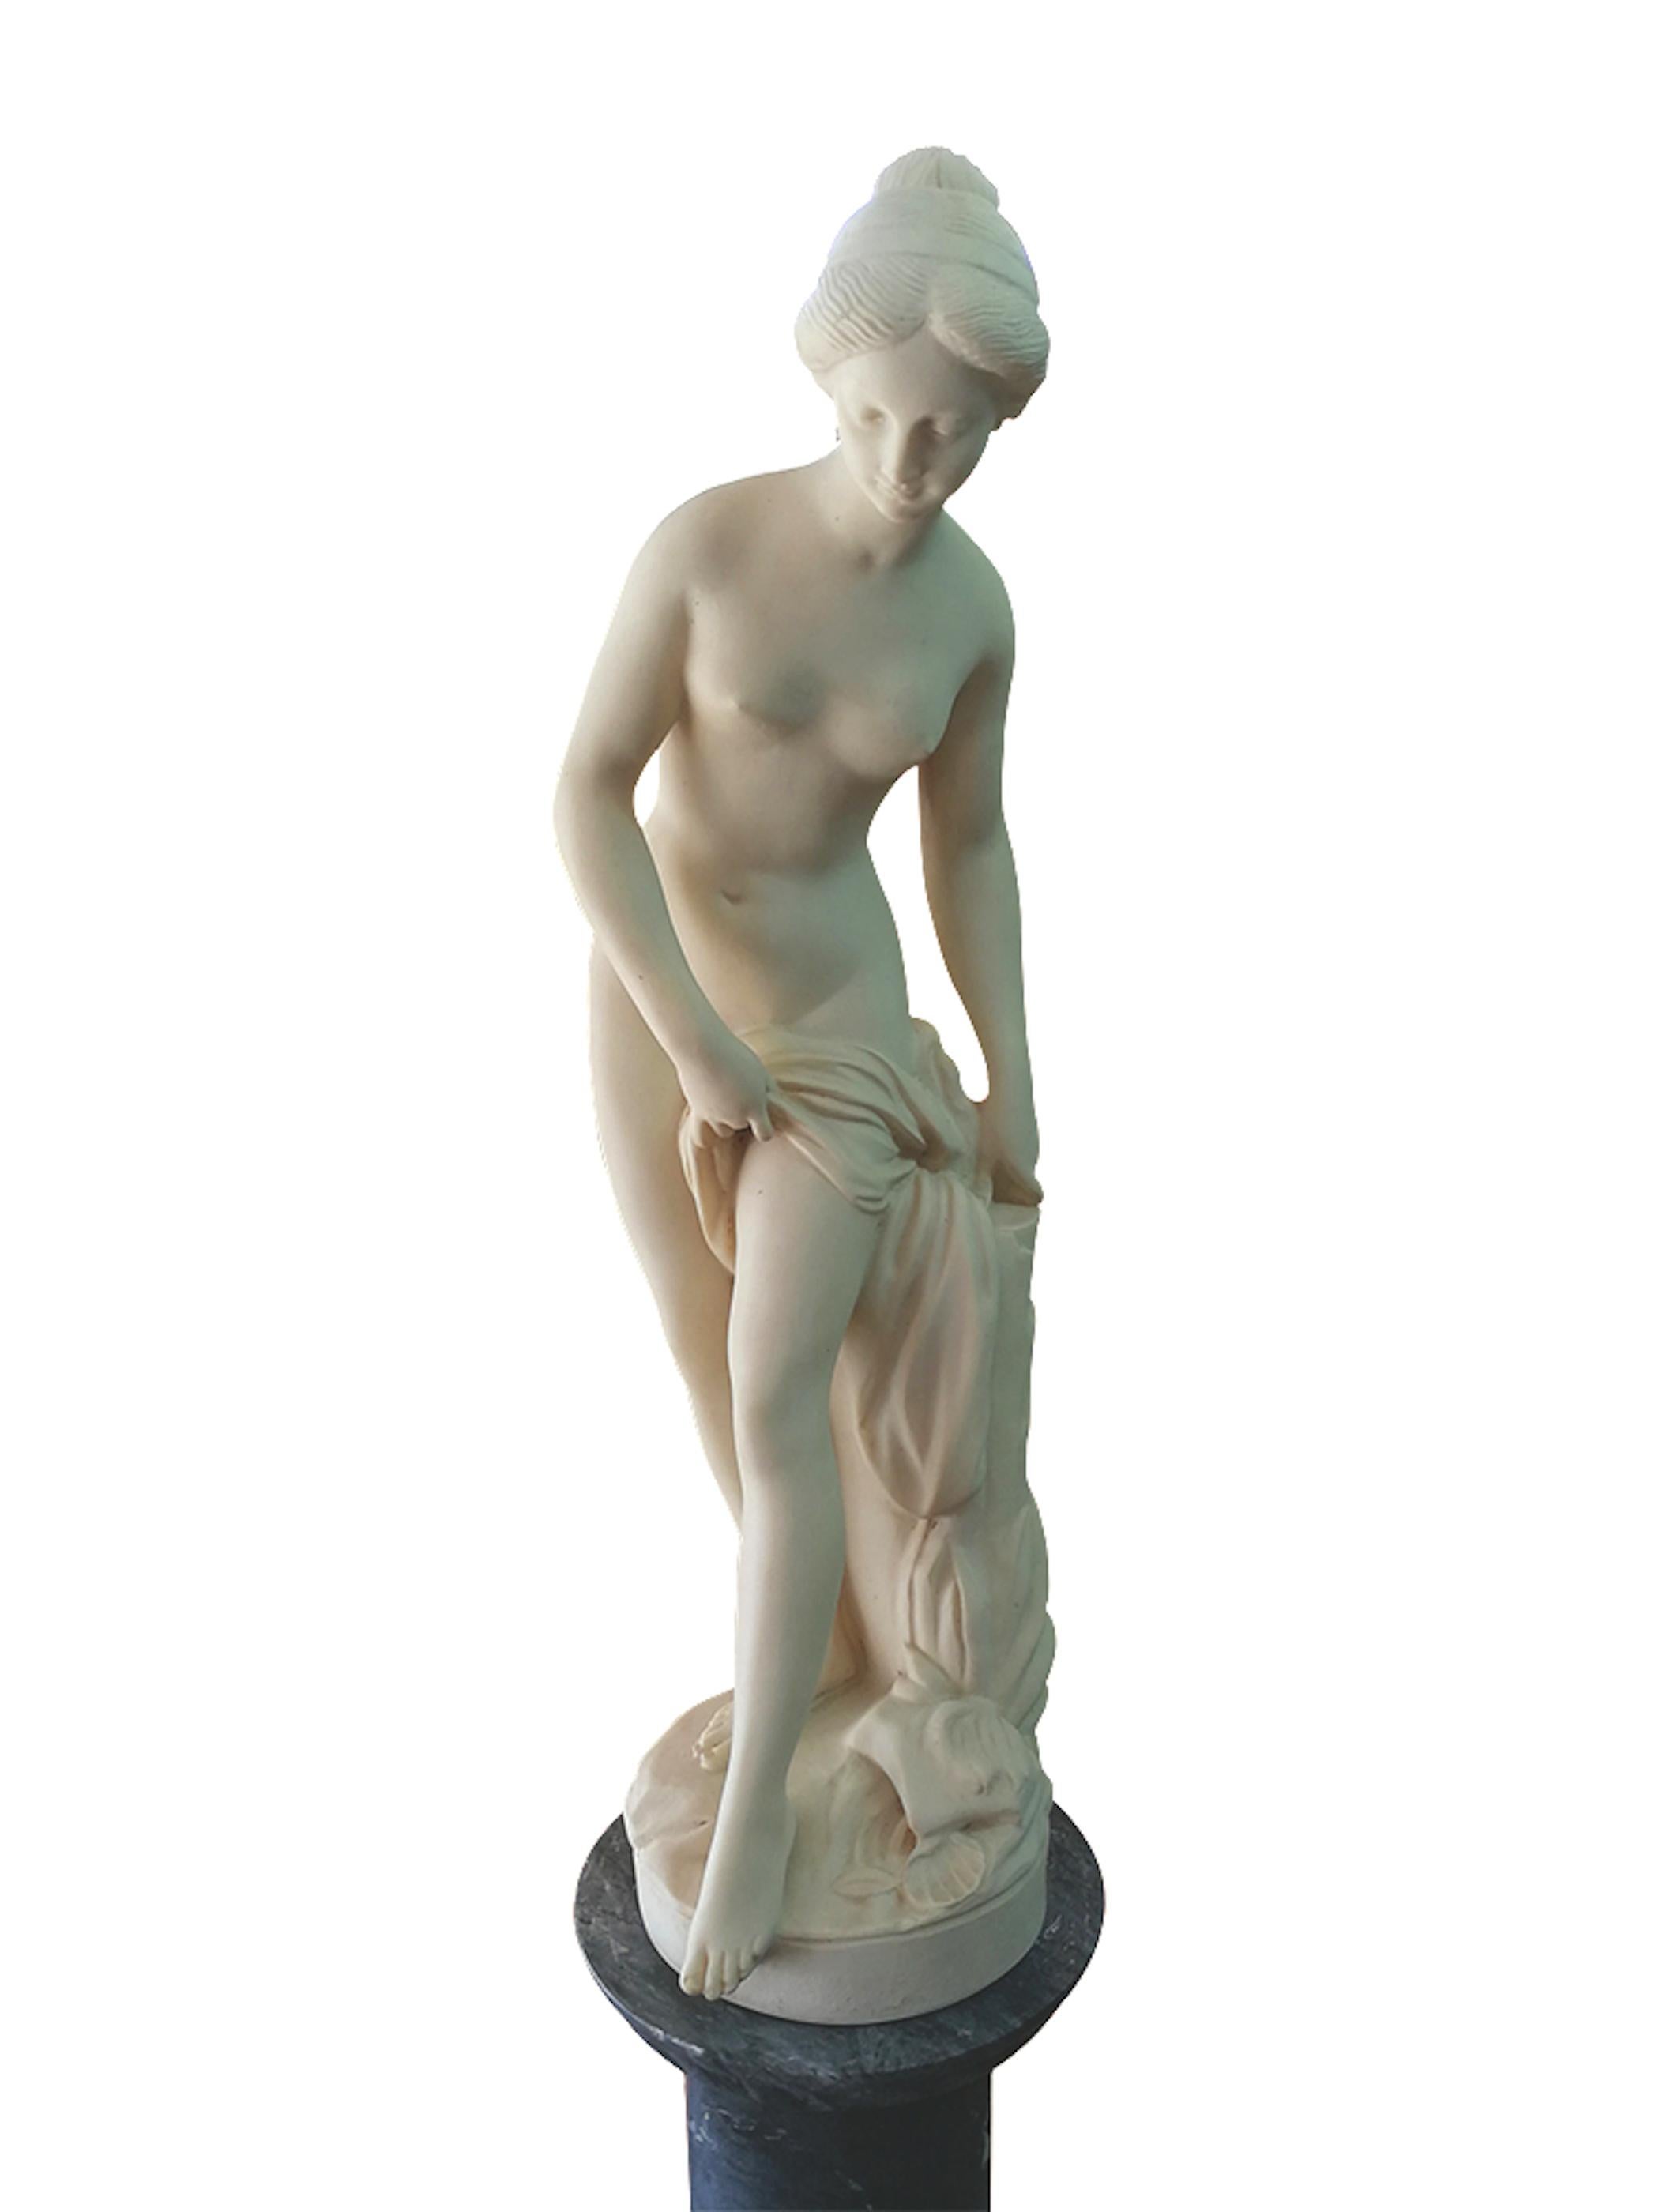 Beautiful and delicate tall neoclassic style resin cast nymph. The marble pedestal not included in the price.
Origin: Unknown, probably from France or Belgium. Family Heritage.
Period: 20th century, the 50s.